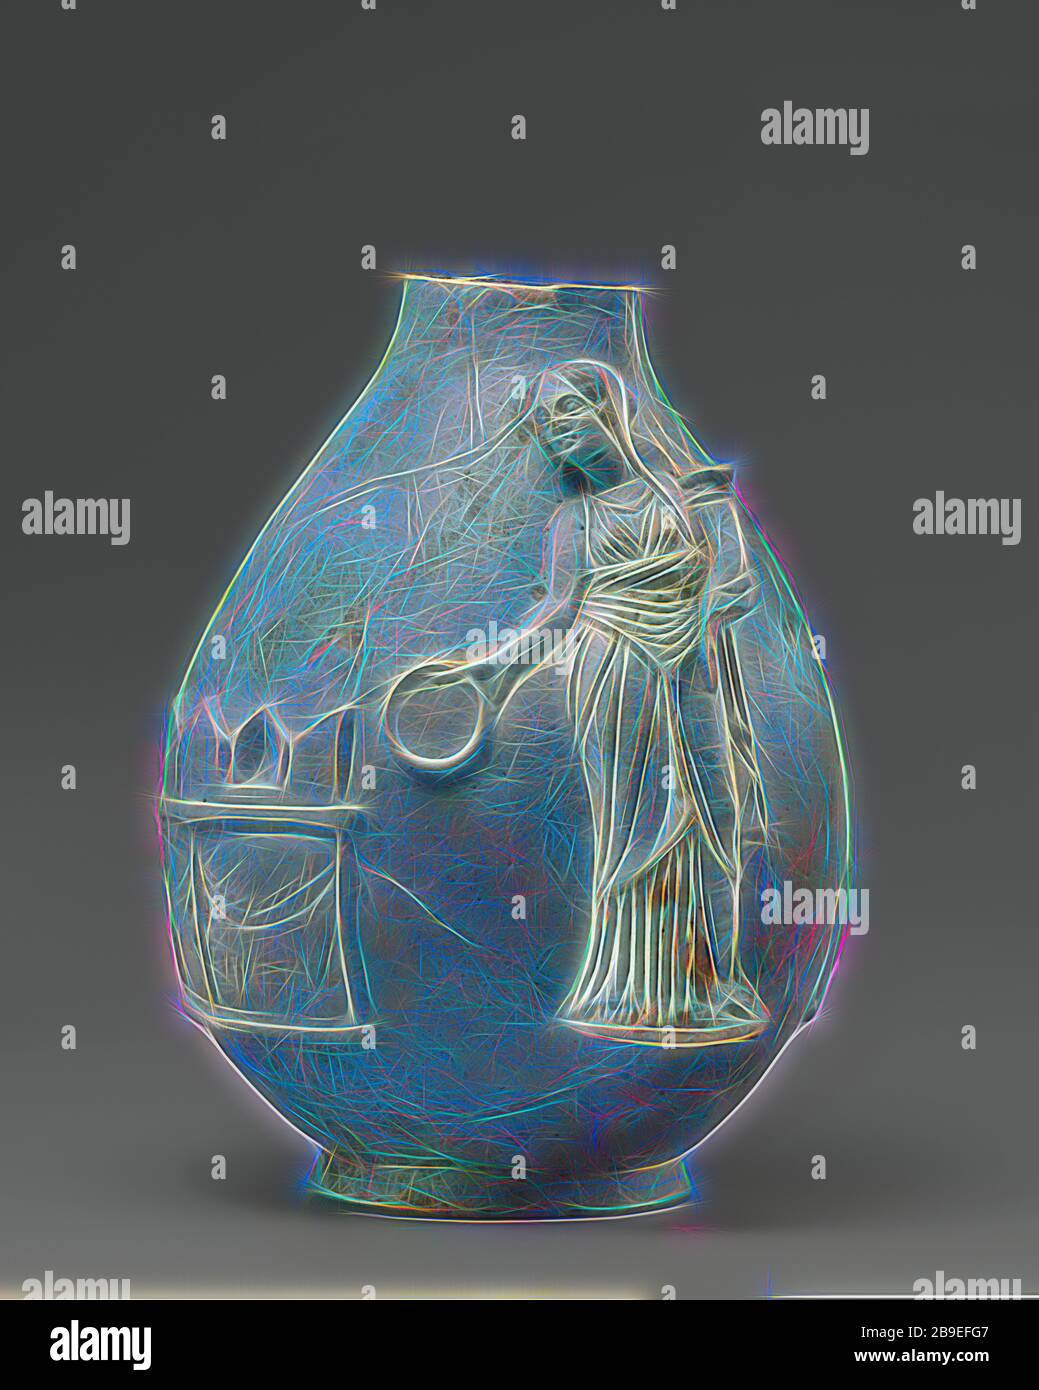 Queen's Vase with Berenike II, Egypt, 243 - 222 B.C, Faience, 22.2 × 14 cm (8 3,4 × 5 1,2 in, Reimagined by Gibon, design of warm cheerful glowing of brightness and light rays radiance. Classic art reinvented with a modern twist. Photography inspired by futurism, embracing dynamic energy of modern technology, movement, speed and revolutionize culture. Stock Photo